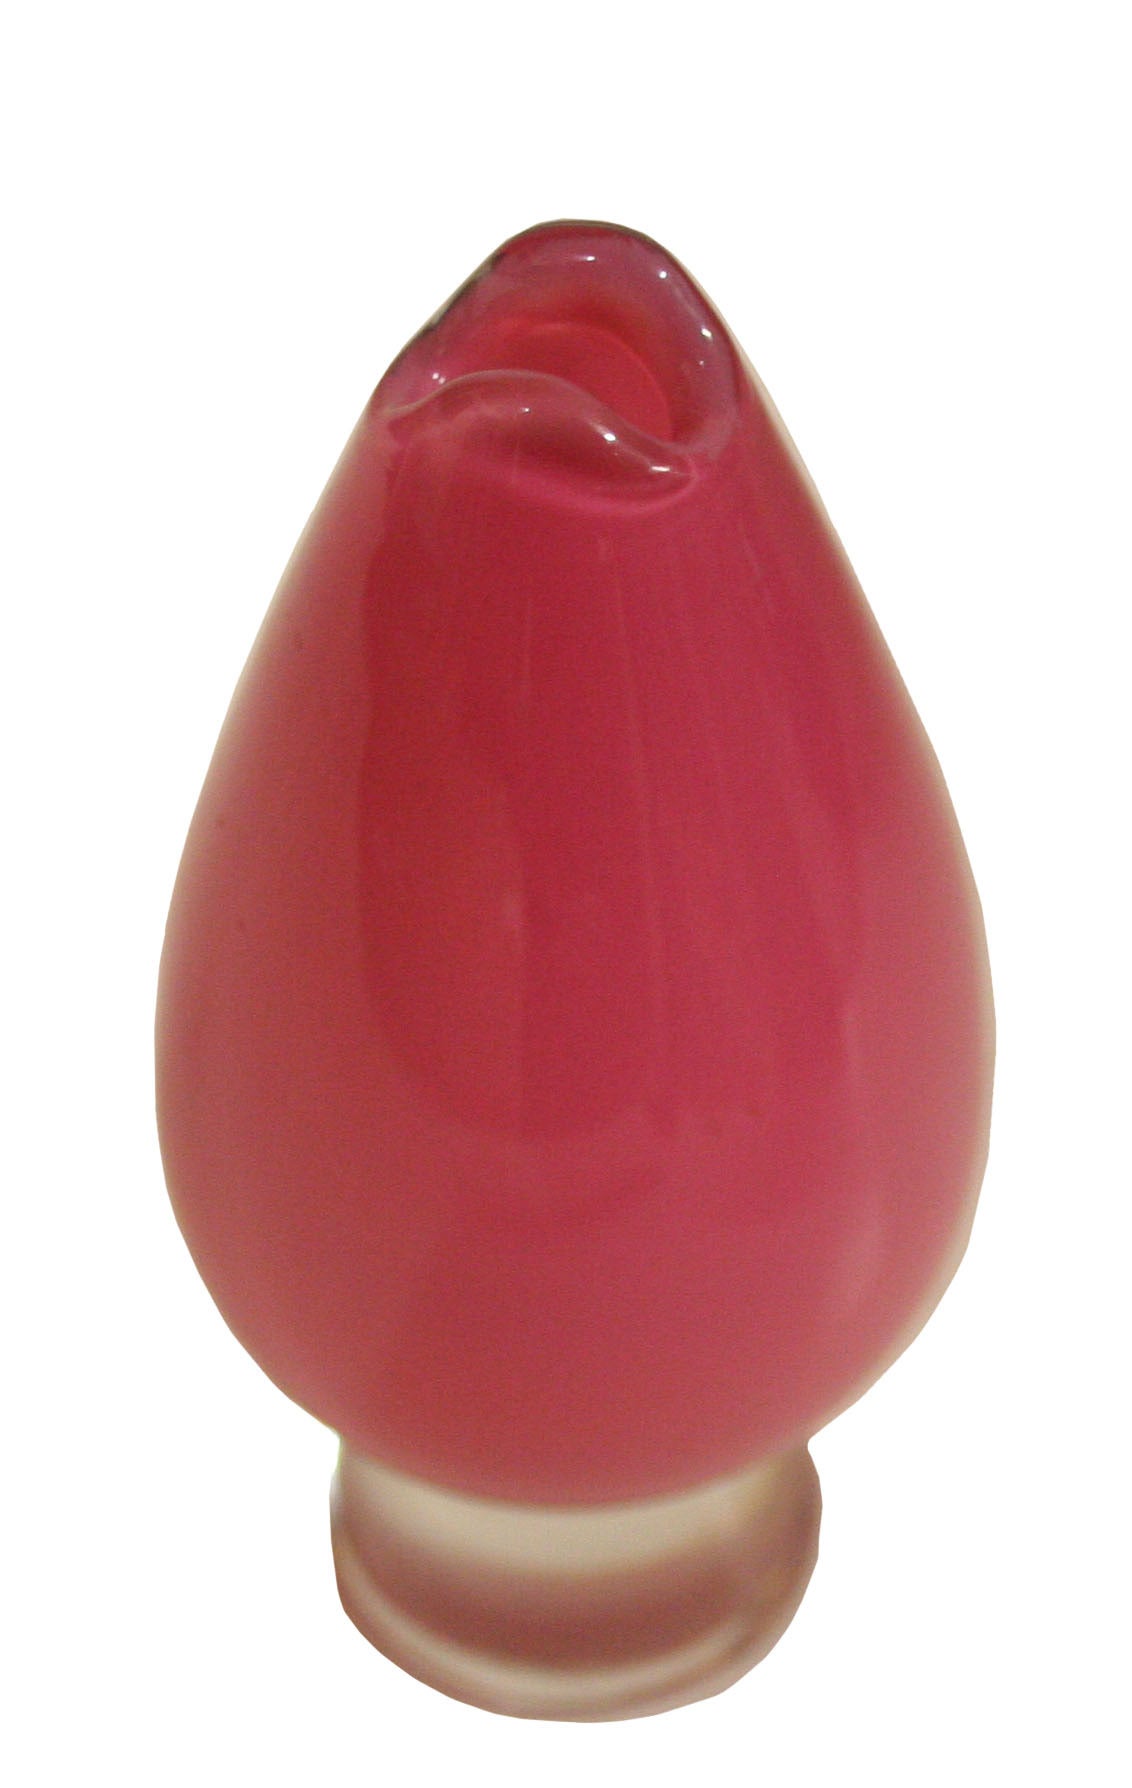 Gorgeous teardrop shaped vase depicting a warm pink color with thick clear glass base.